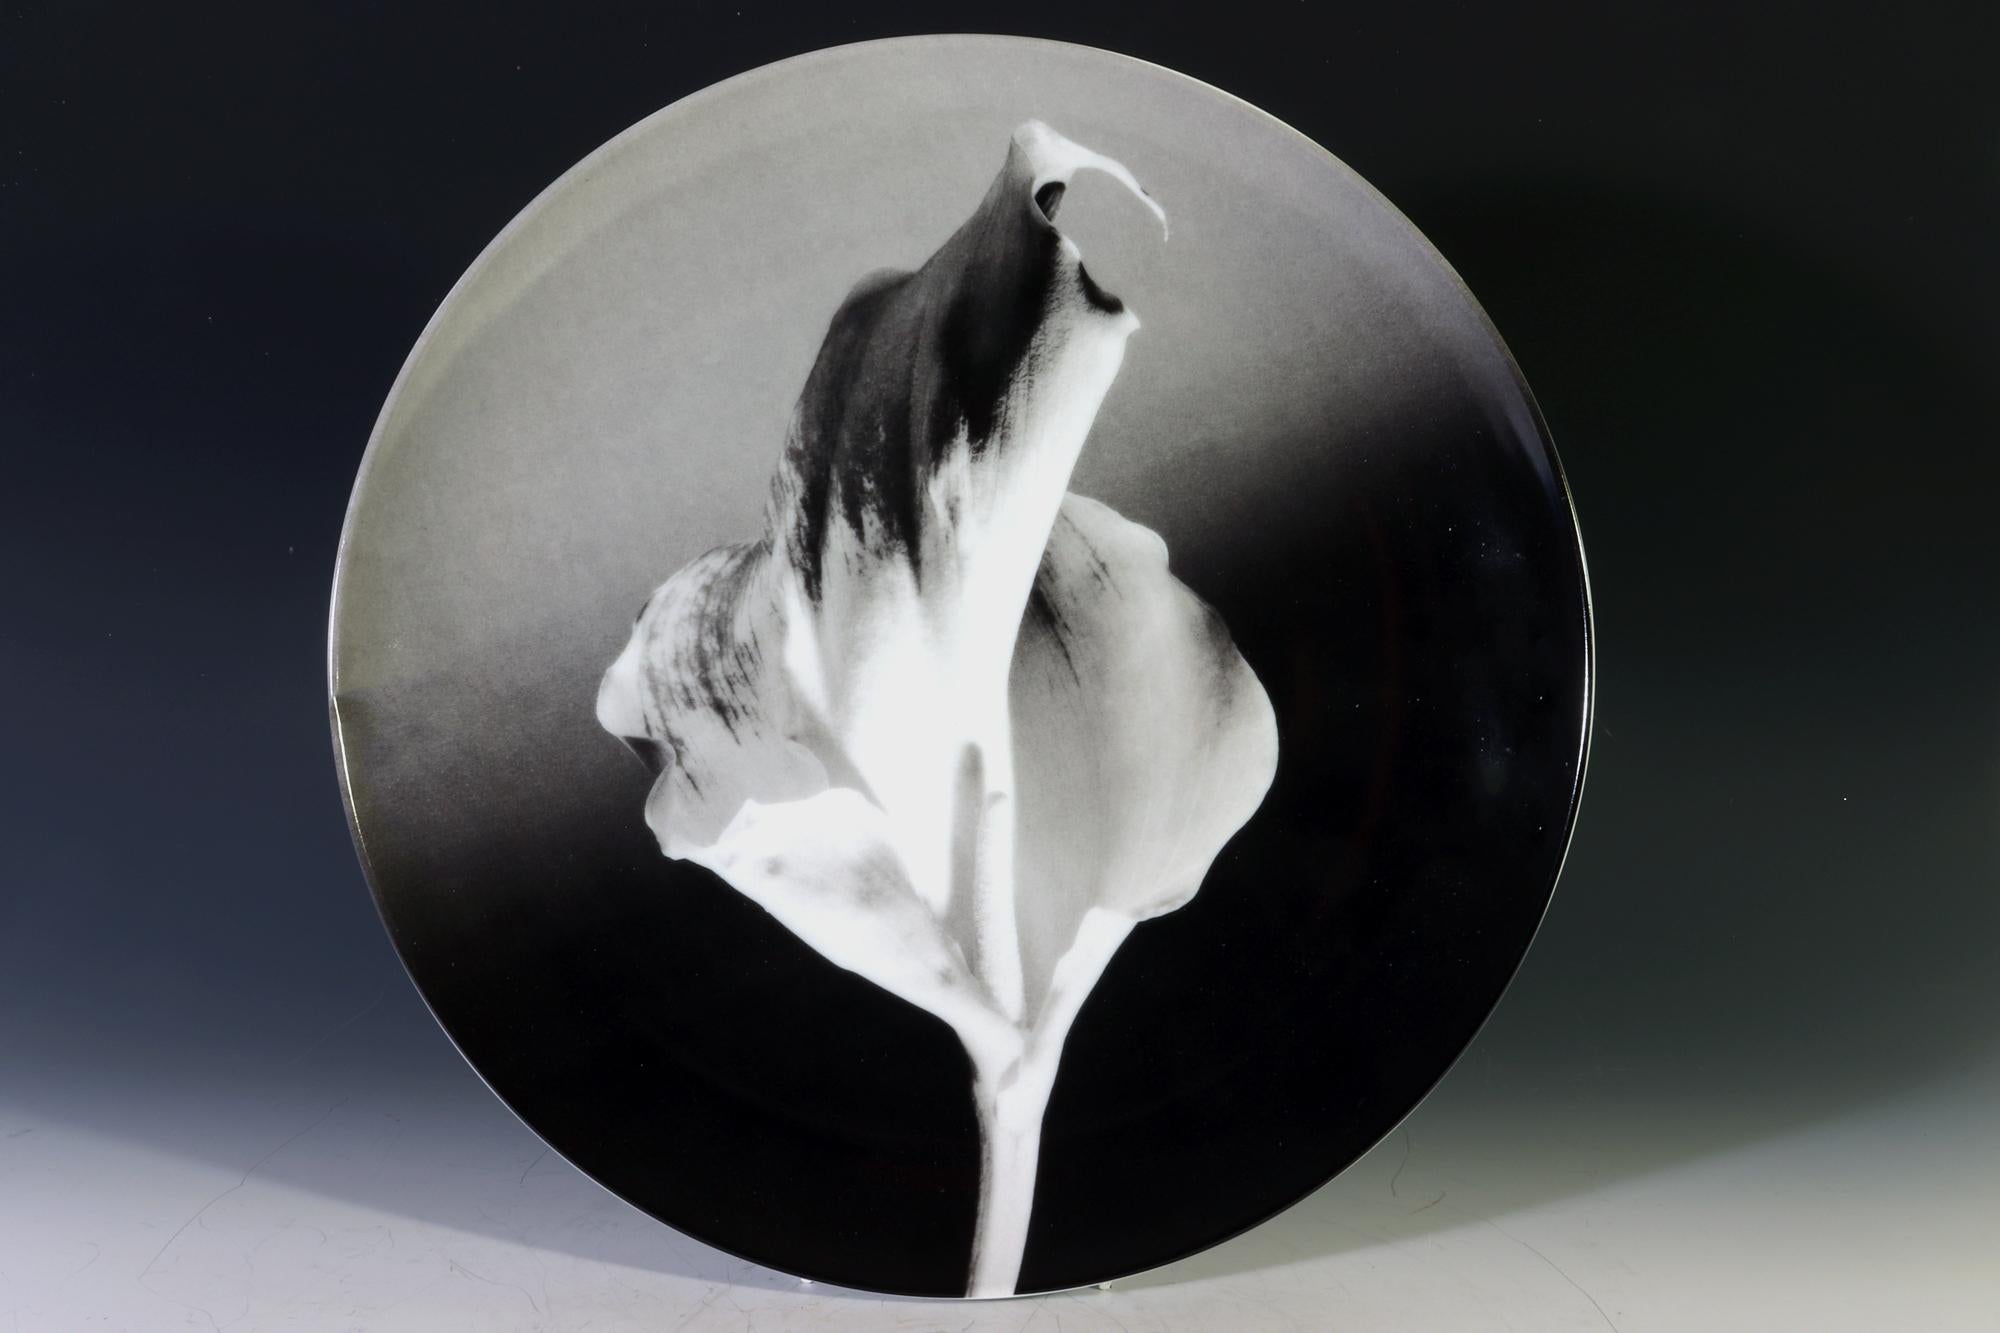 Robert Mapplethorpe Botanical Plate,
Flower, 1986
Made By Swid Powell

The Robert Mapplethorpe porcelain plate depicts in black and white a flower dated on the reverse 1987.  It is lithographically printed porcelain based on Robert Mapplethorpe's